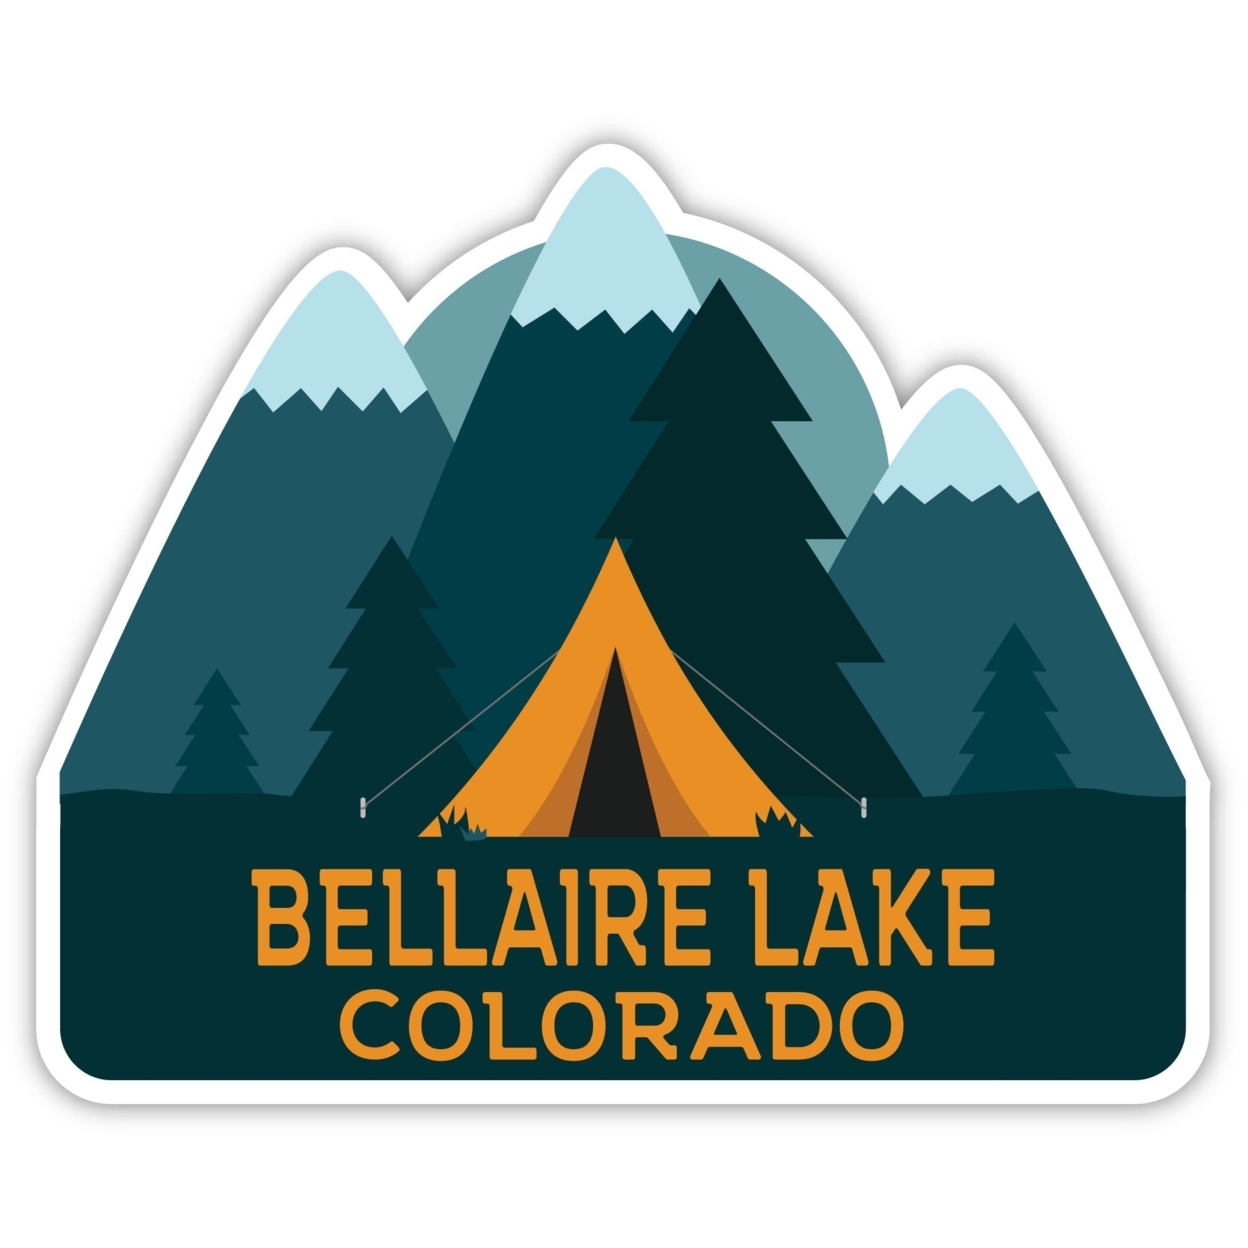 Bellaire Lake Colorado Souvenir Decorative Stickers (Choose Theme And Size) - 4-Pack, 12-Inch, Tent